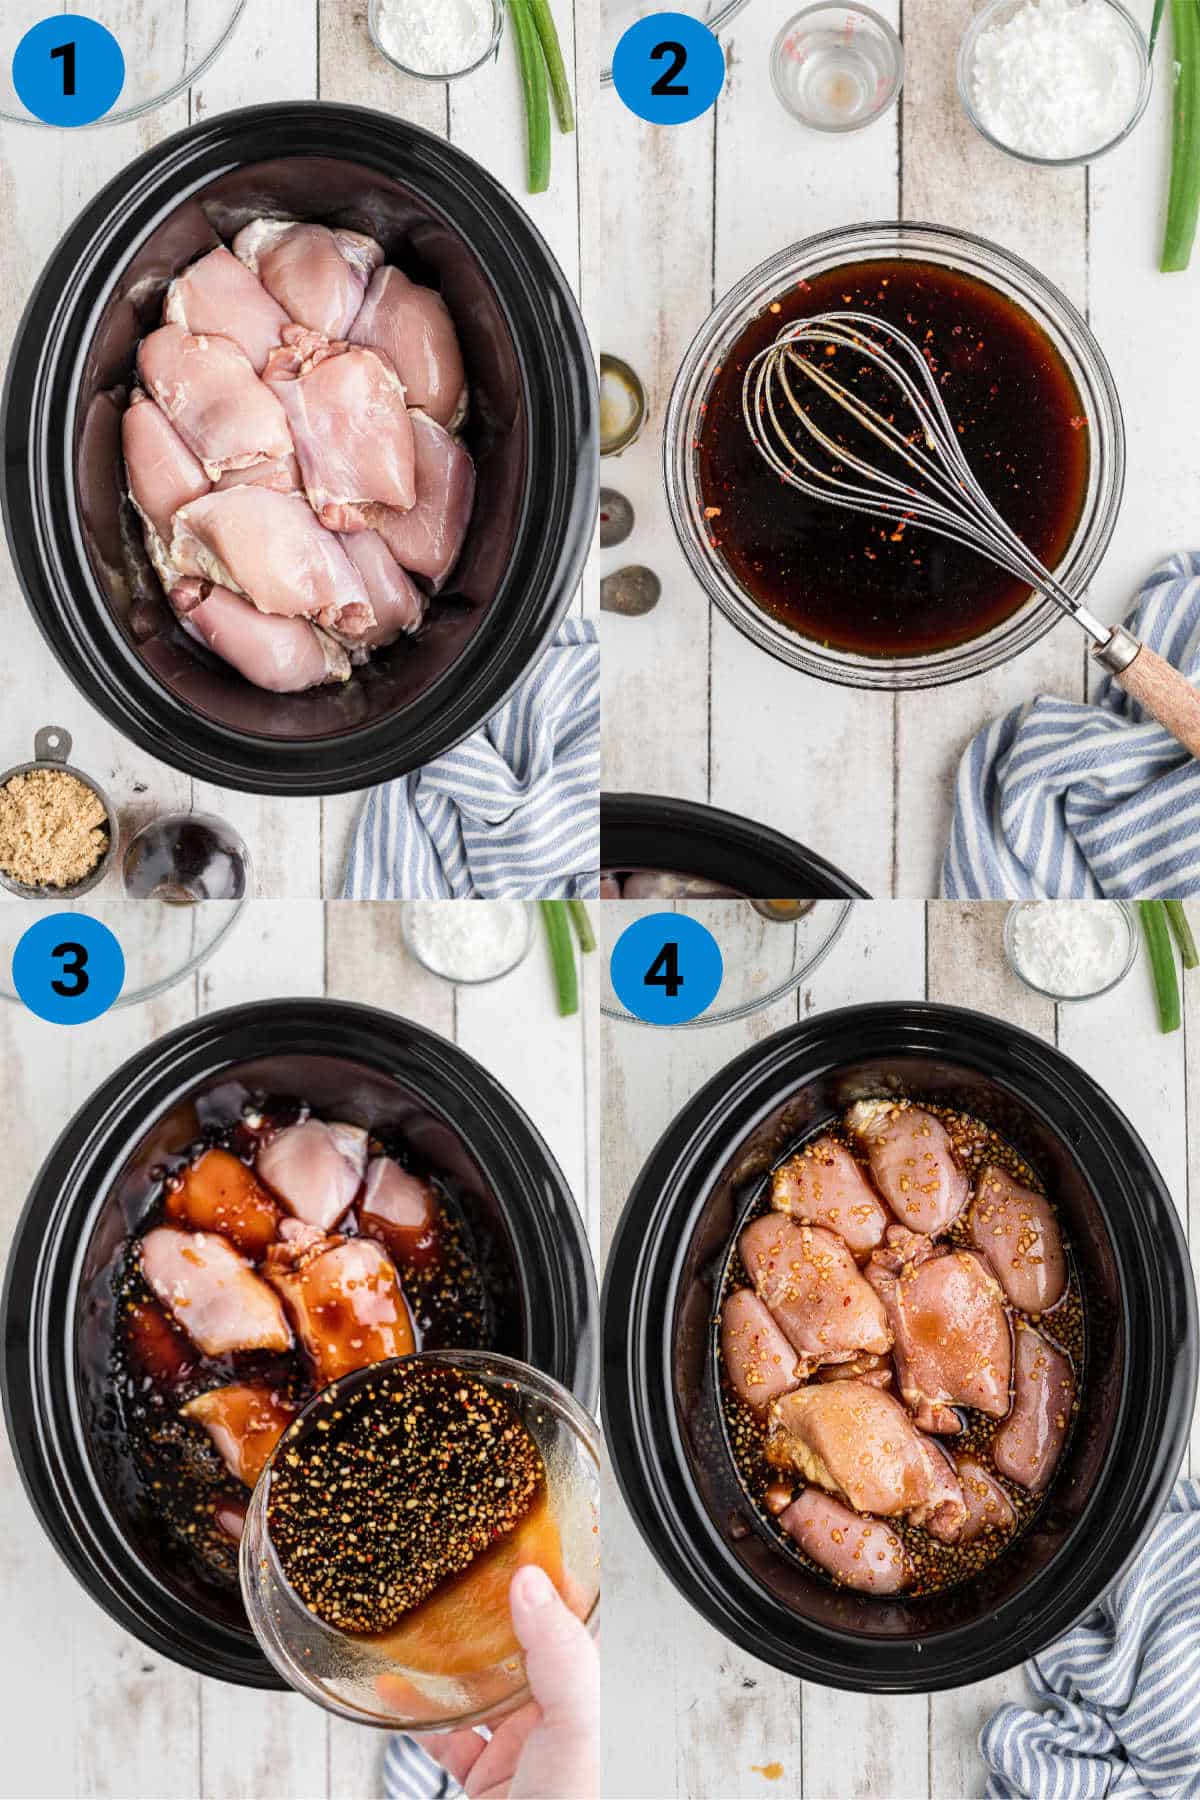 A collage of four images showing how to make crock pot bourbon chicken, steps 1 through 4.